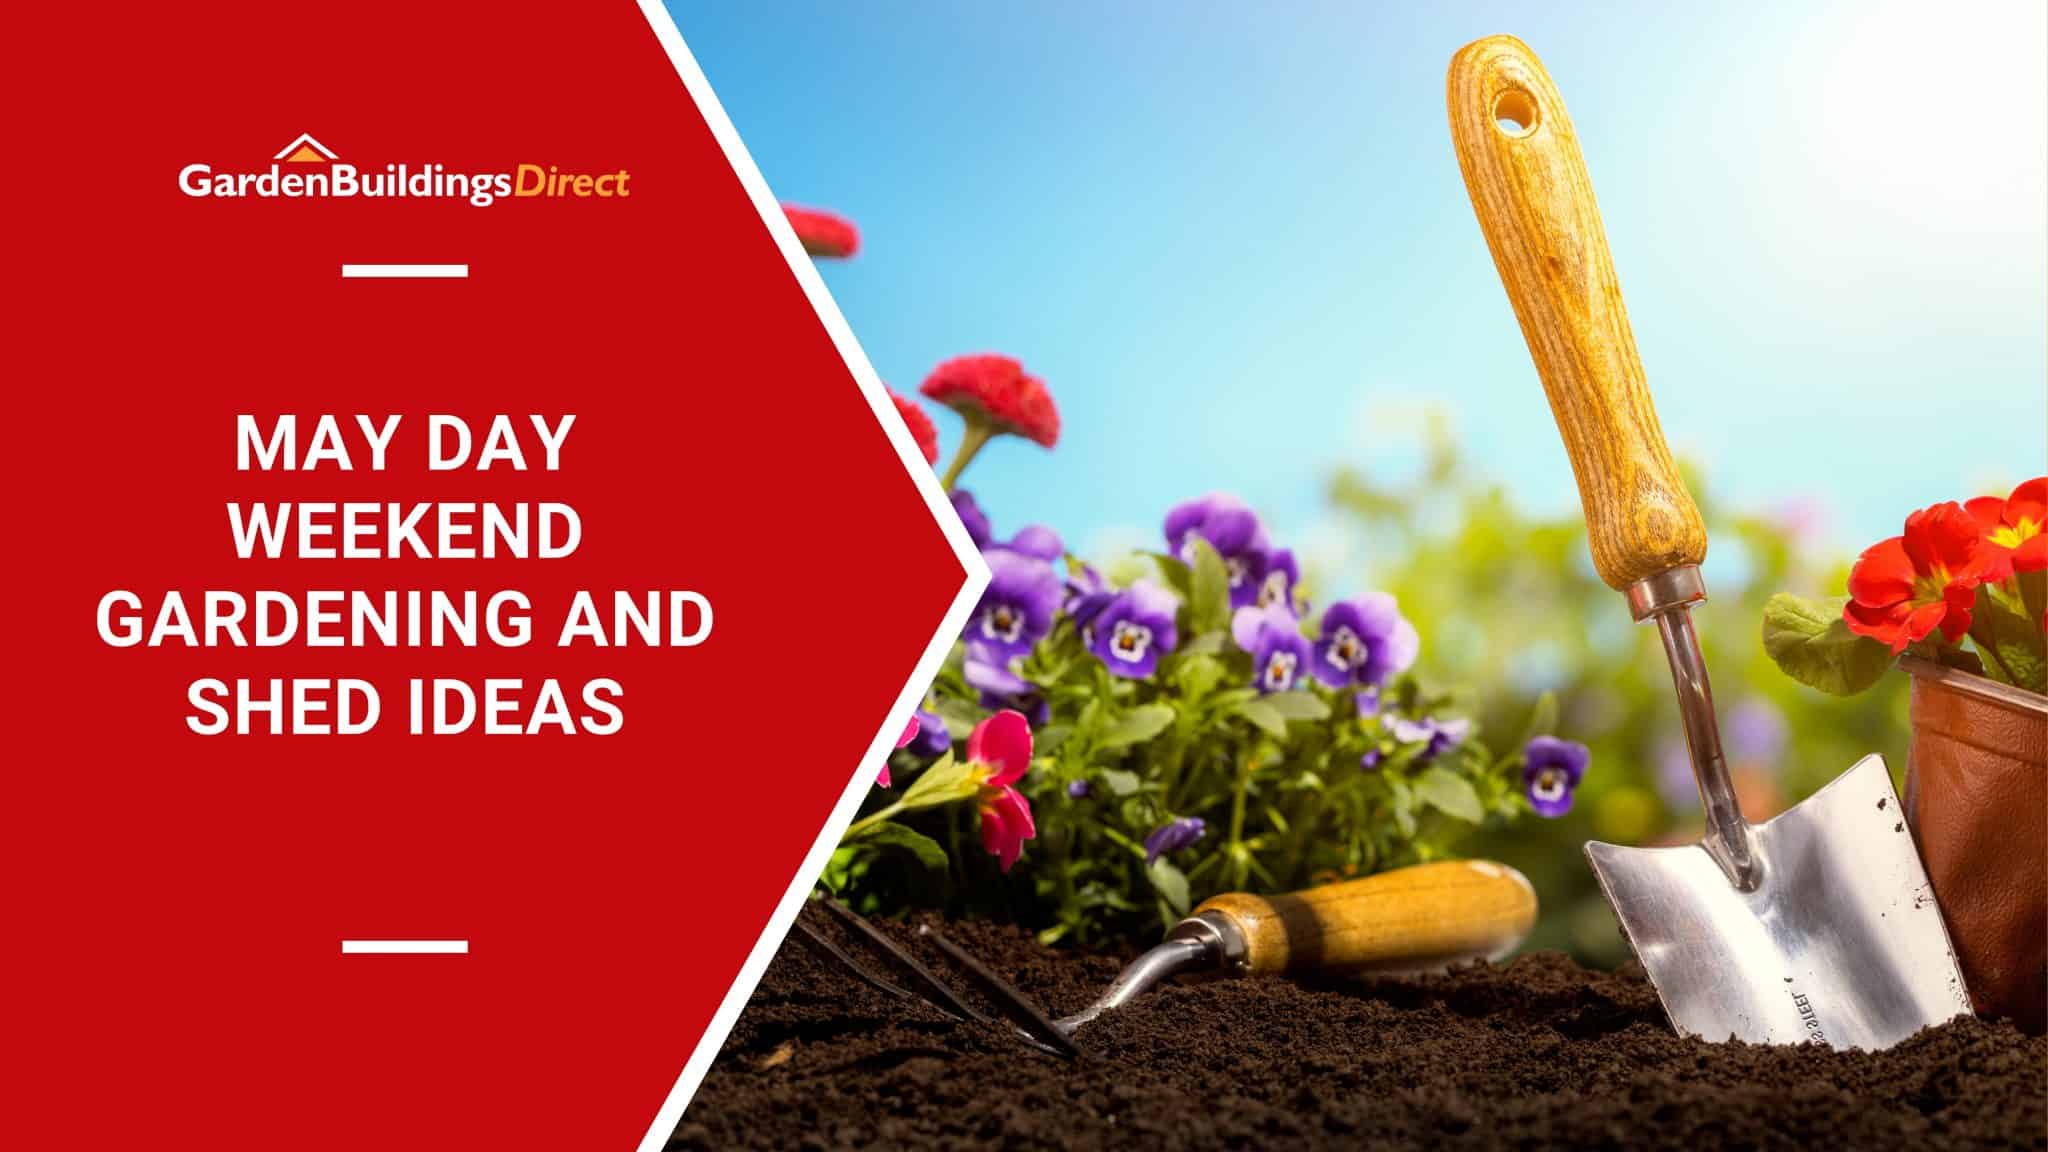 'May Day Weekend' gardening and shed idea on a red arrow with garden buildings direct logo pointing at cartoon flowers and a trowel in soil